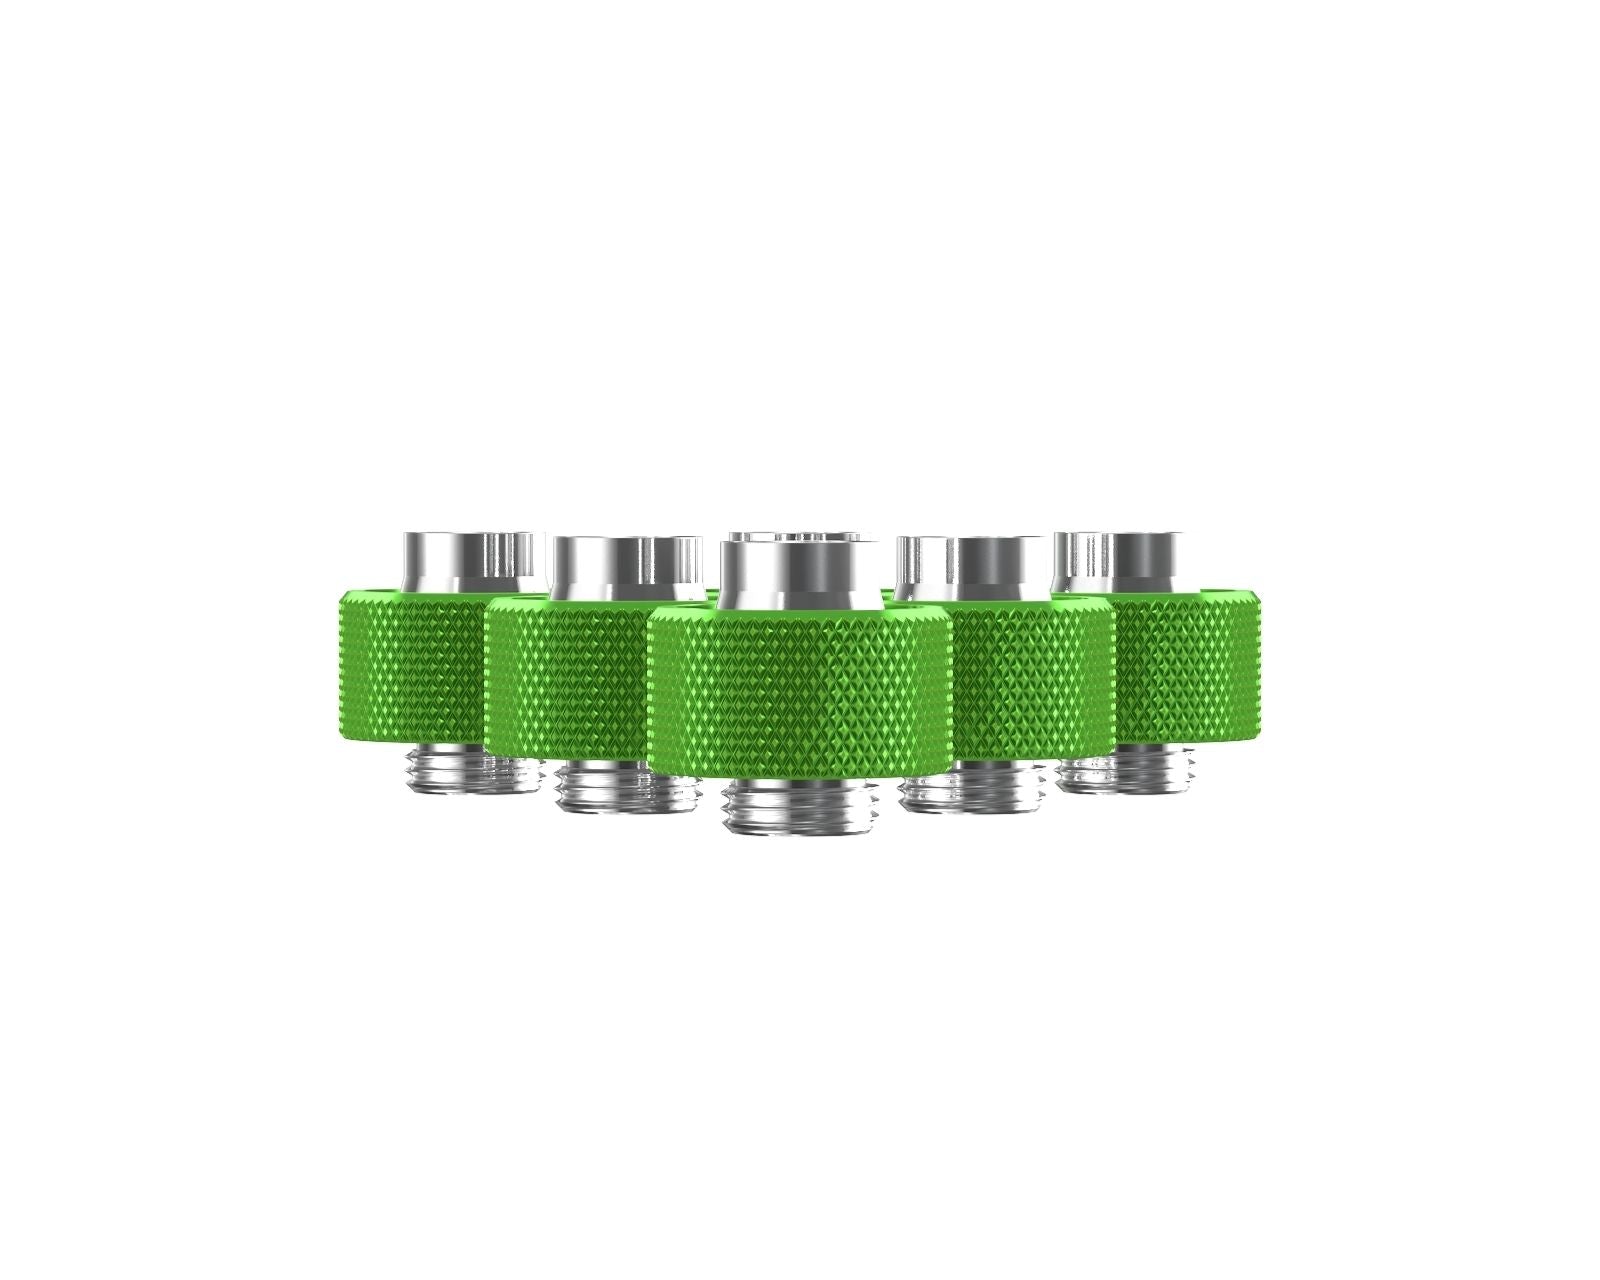 PrimoChill SecureFit SX - Premium Compression Fittings 6 Pack - For 1/2in ID x 3/4in OD Flexible Tubing (F-SFSX34-6) - Available in 20+ Colors, Custom Watercooling Loop Ready - Toxic Candy